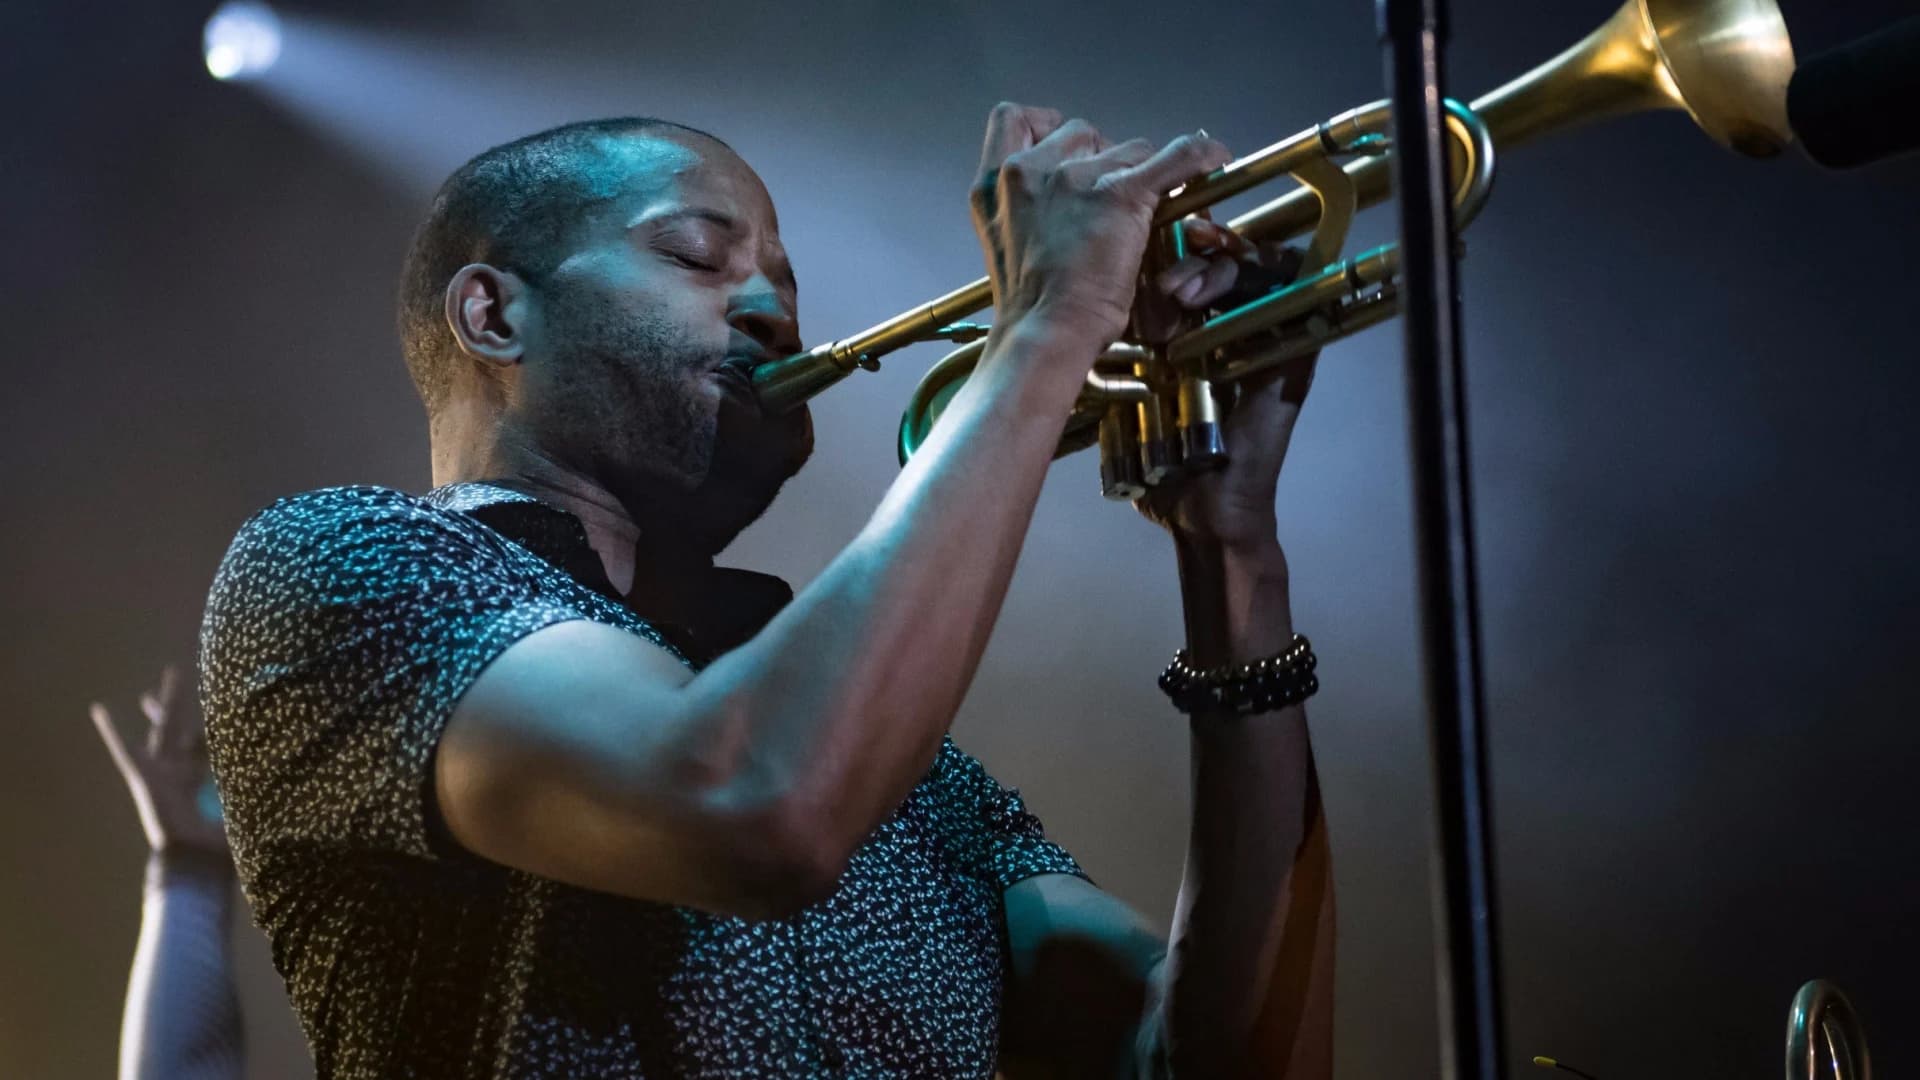 PHOTOS: Trombone Shorty at The Space in Westbury